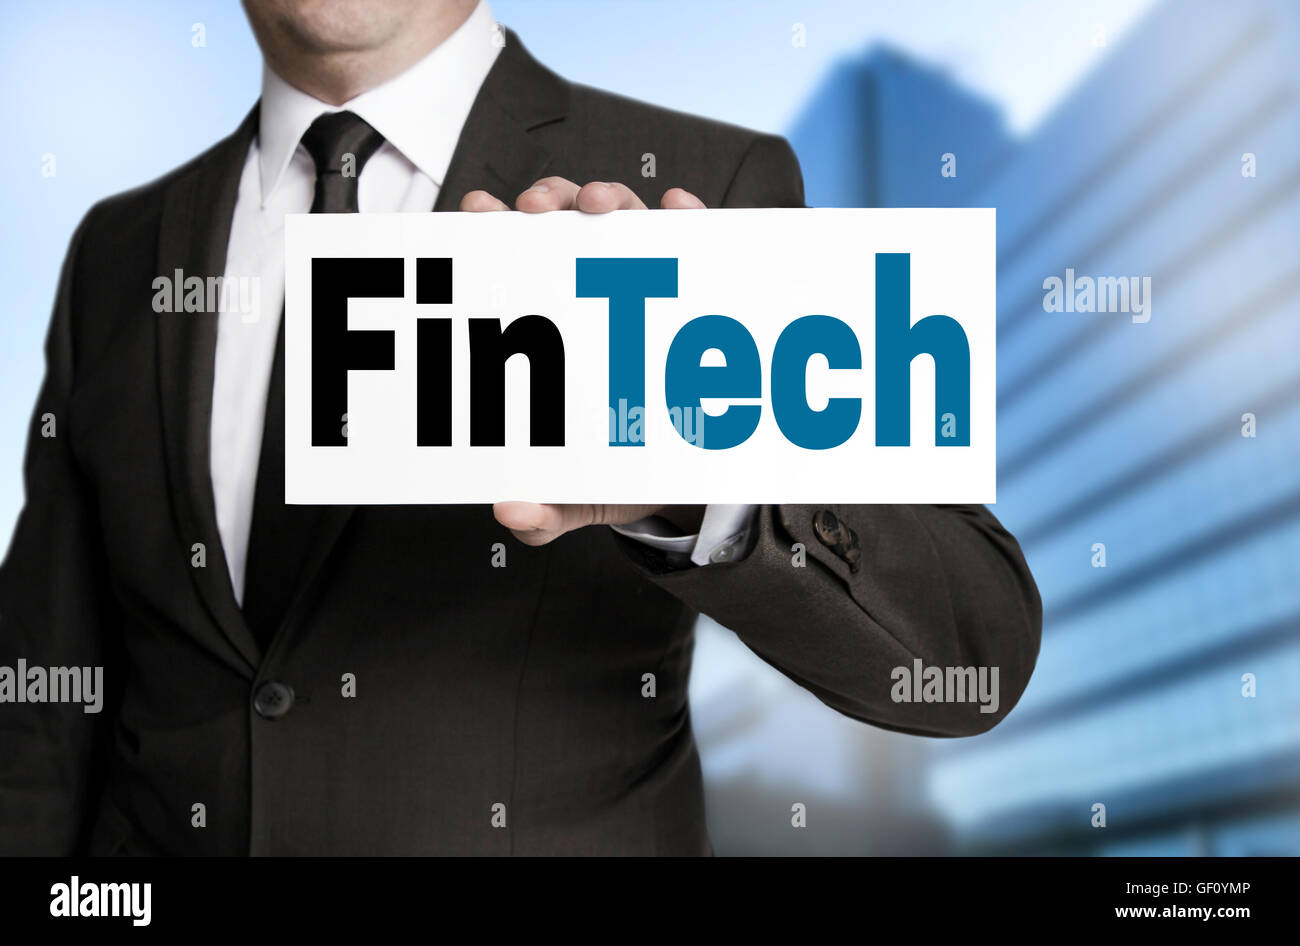 FinTech sign is held by businessman. Stock Photo